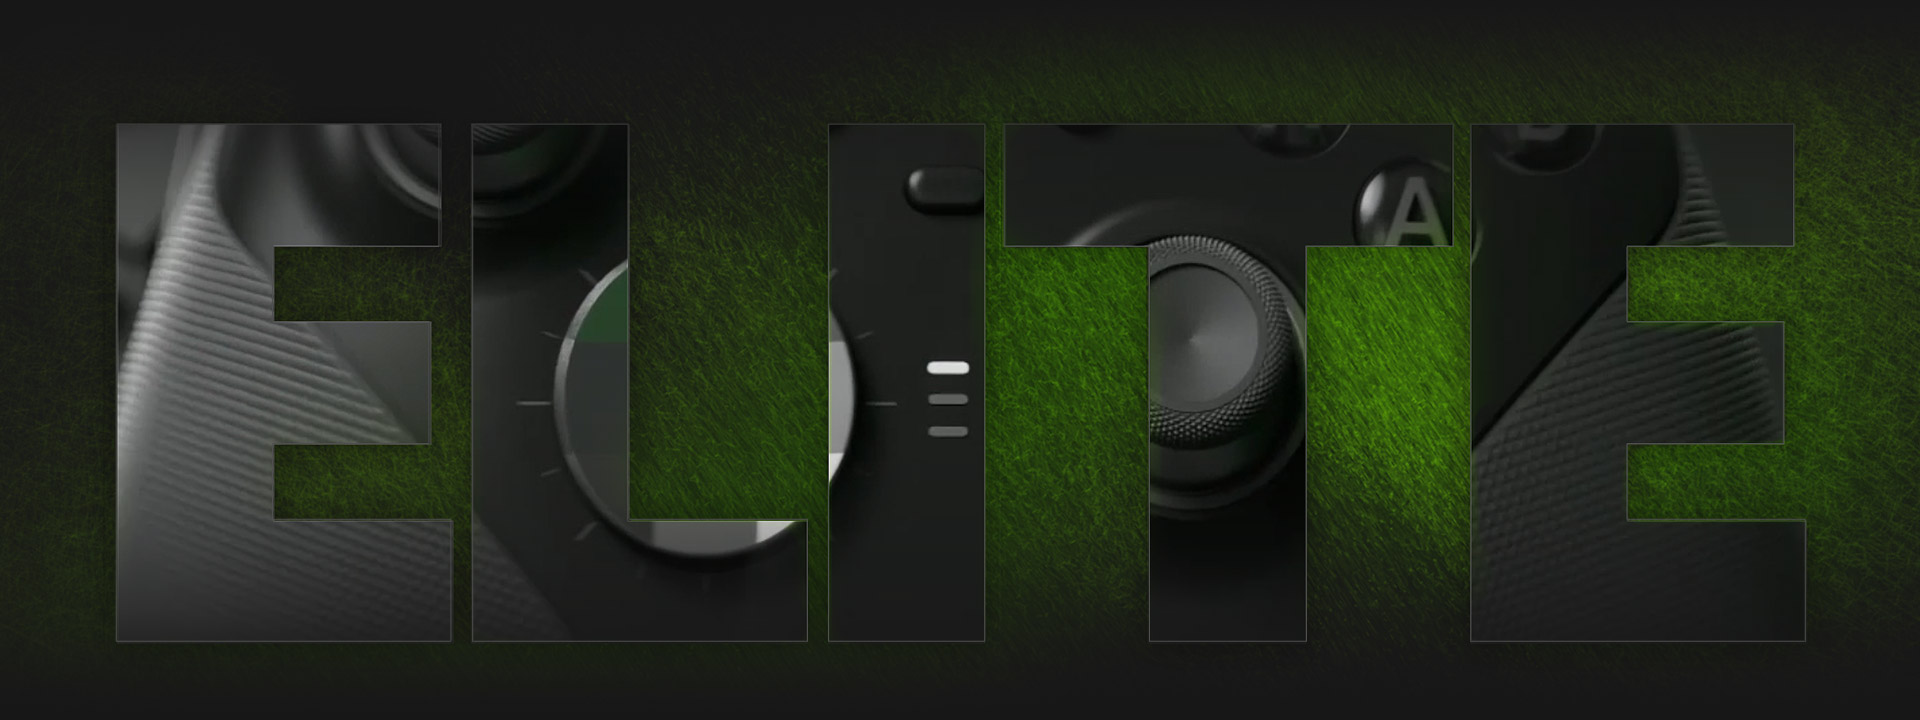 Close-up of Xbox Elite controllers through a cut-out of the word elite.